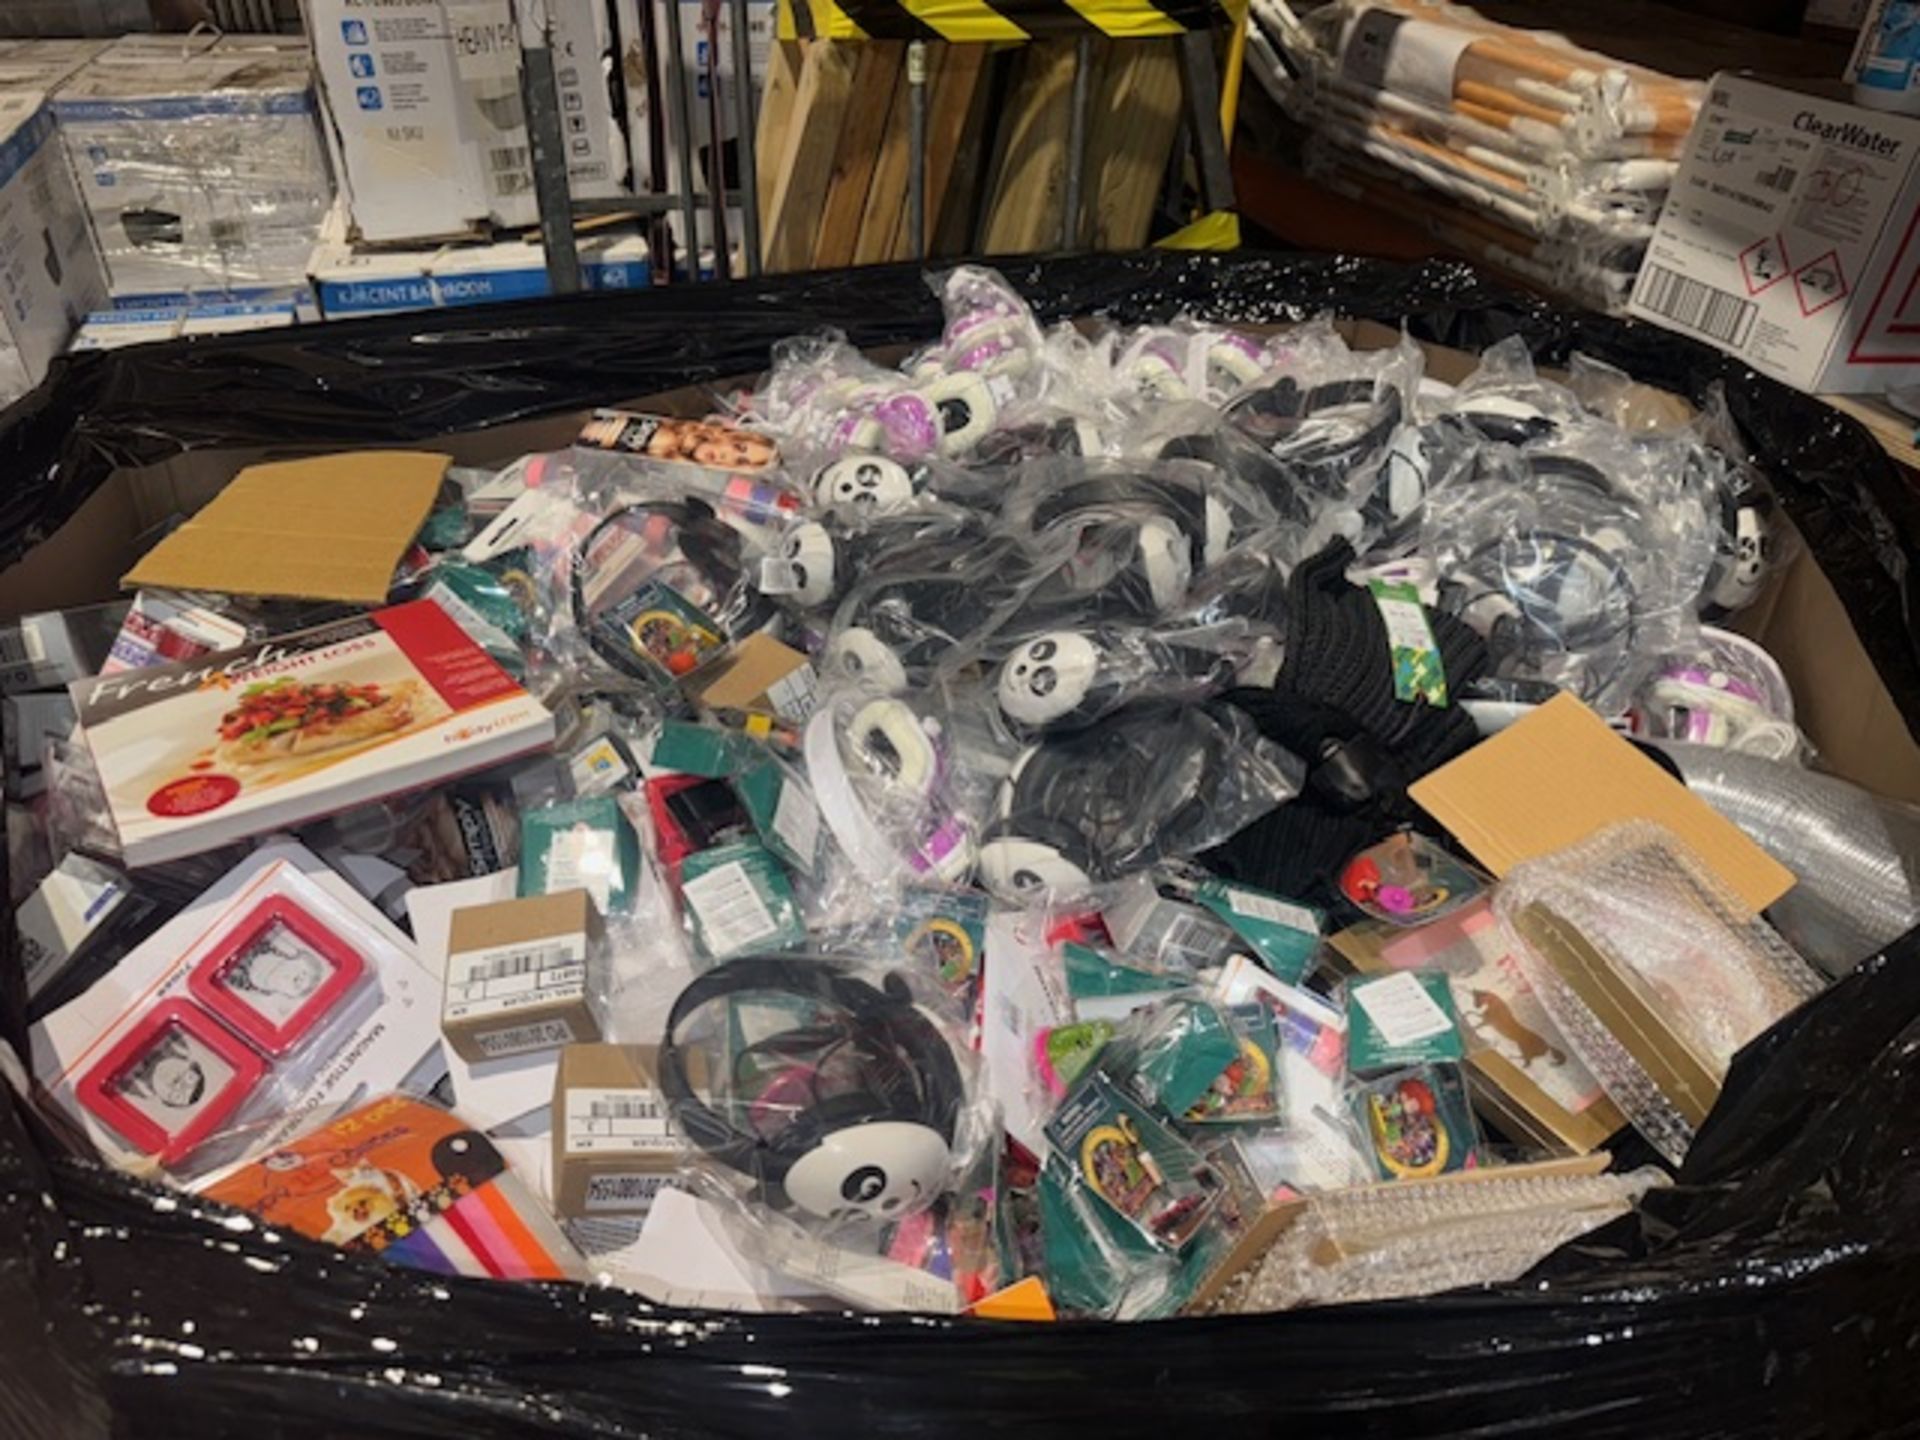 500 PIECE BRAND NEW MIXED AMAZON OVERSTOCK LOT INCLUDING TOYS,, HATS, GLOVES, PET PRODUCTS,